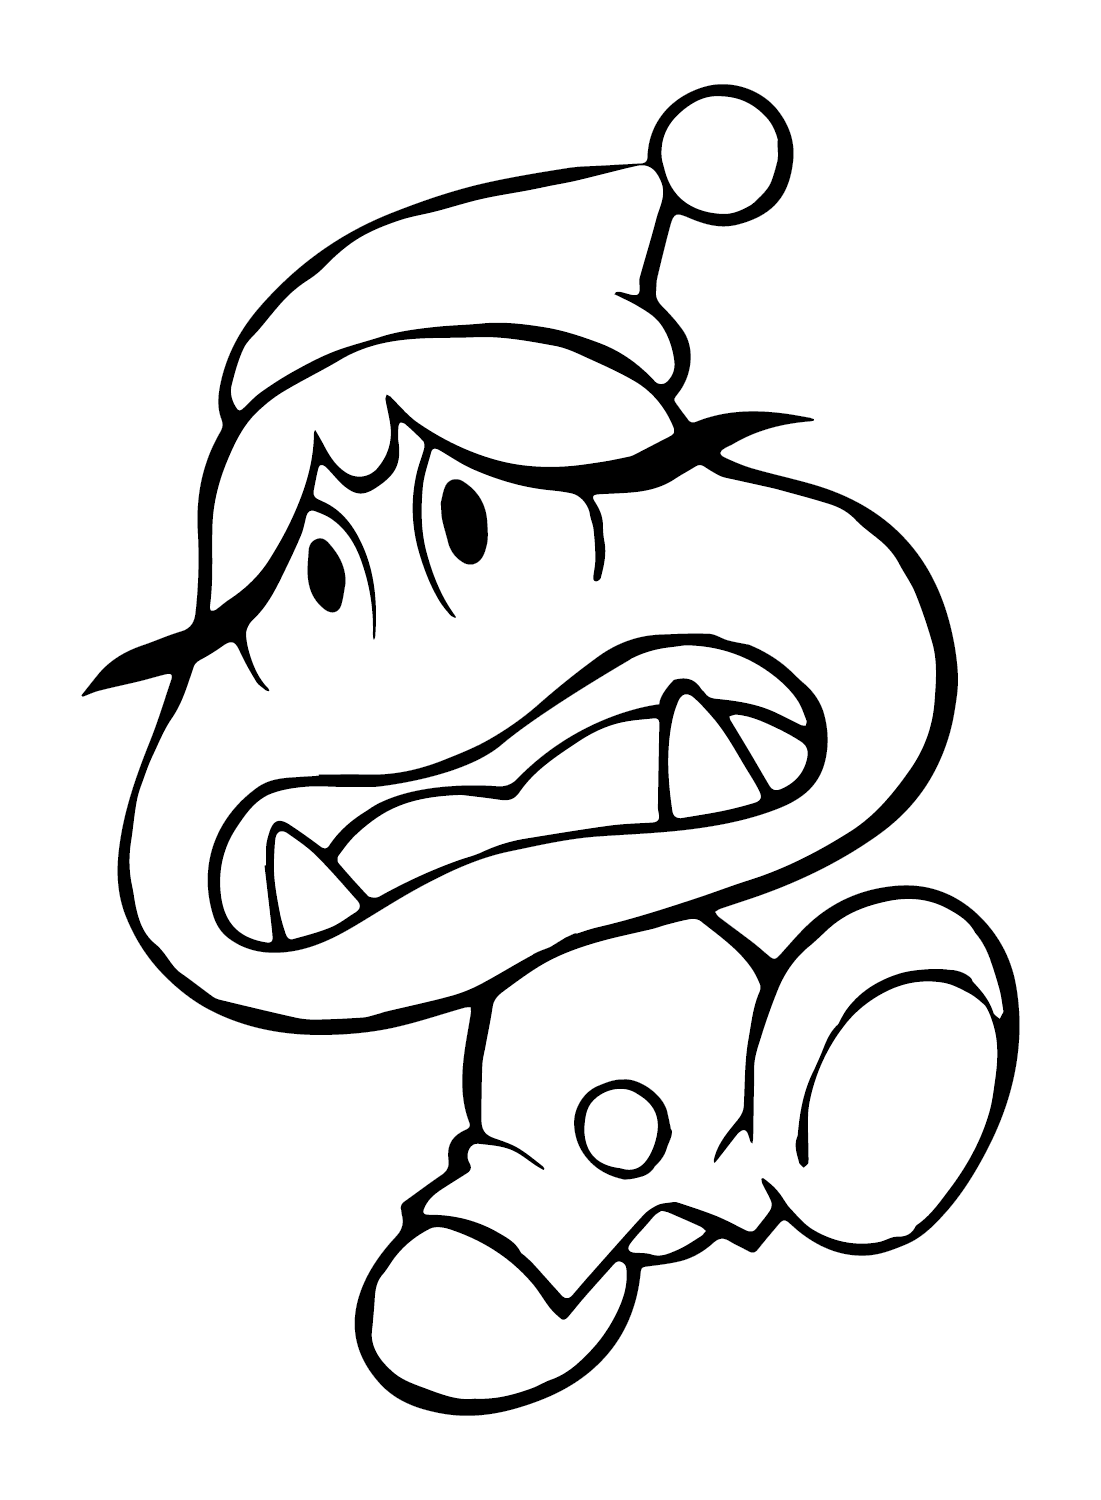 Goomba Adorable Coloring Page